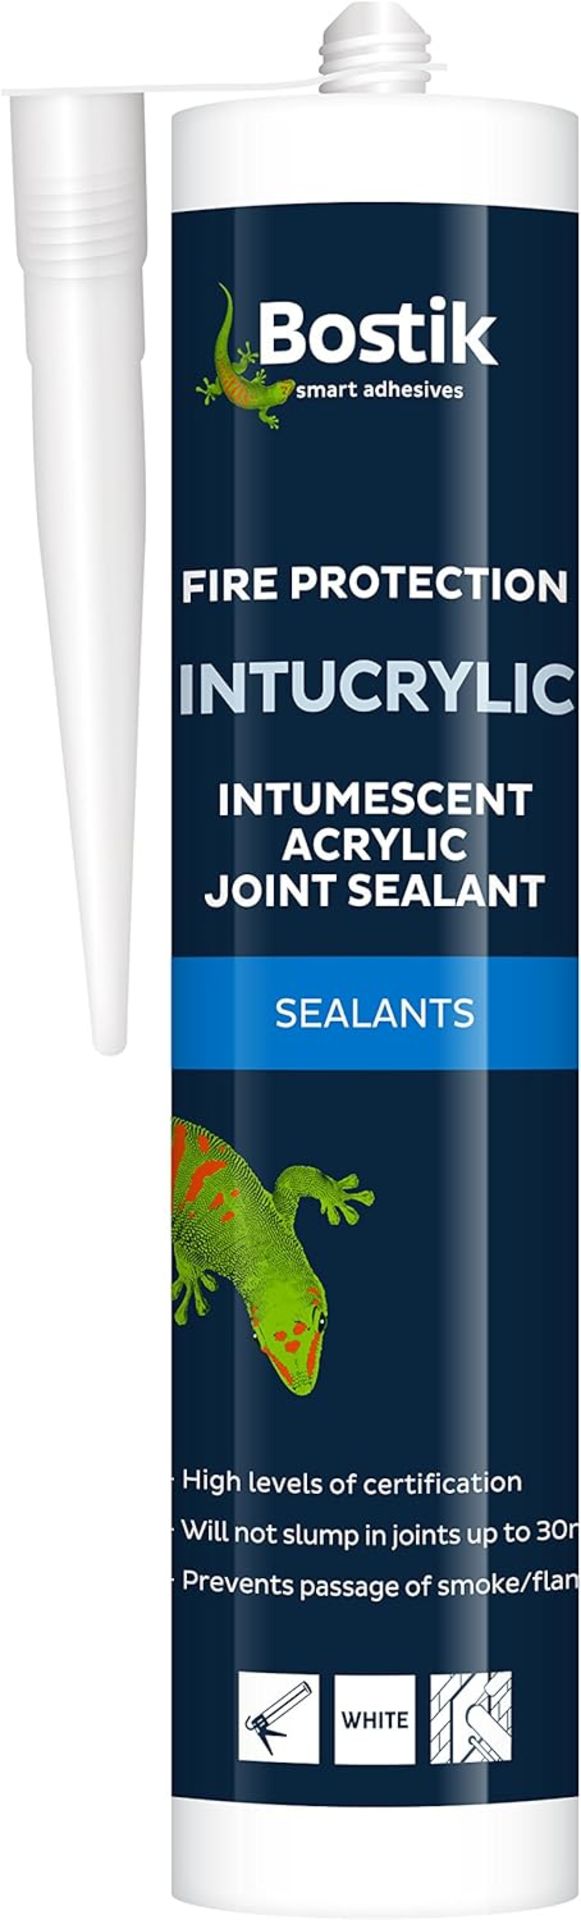 20x BRAND NEW BOSTIK Fire protection Intucrylic Joint Sealant 290ml. RRP £9.79 EACH. (R5-7).